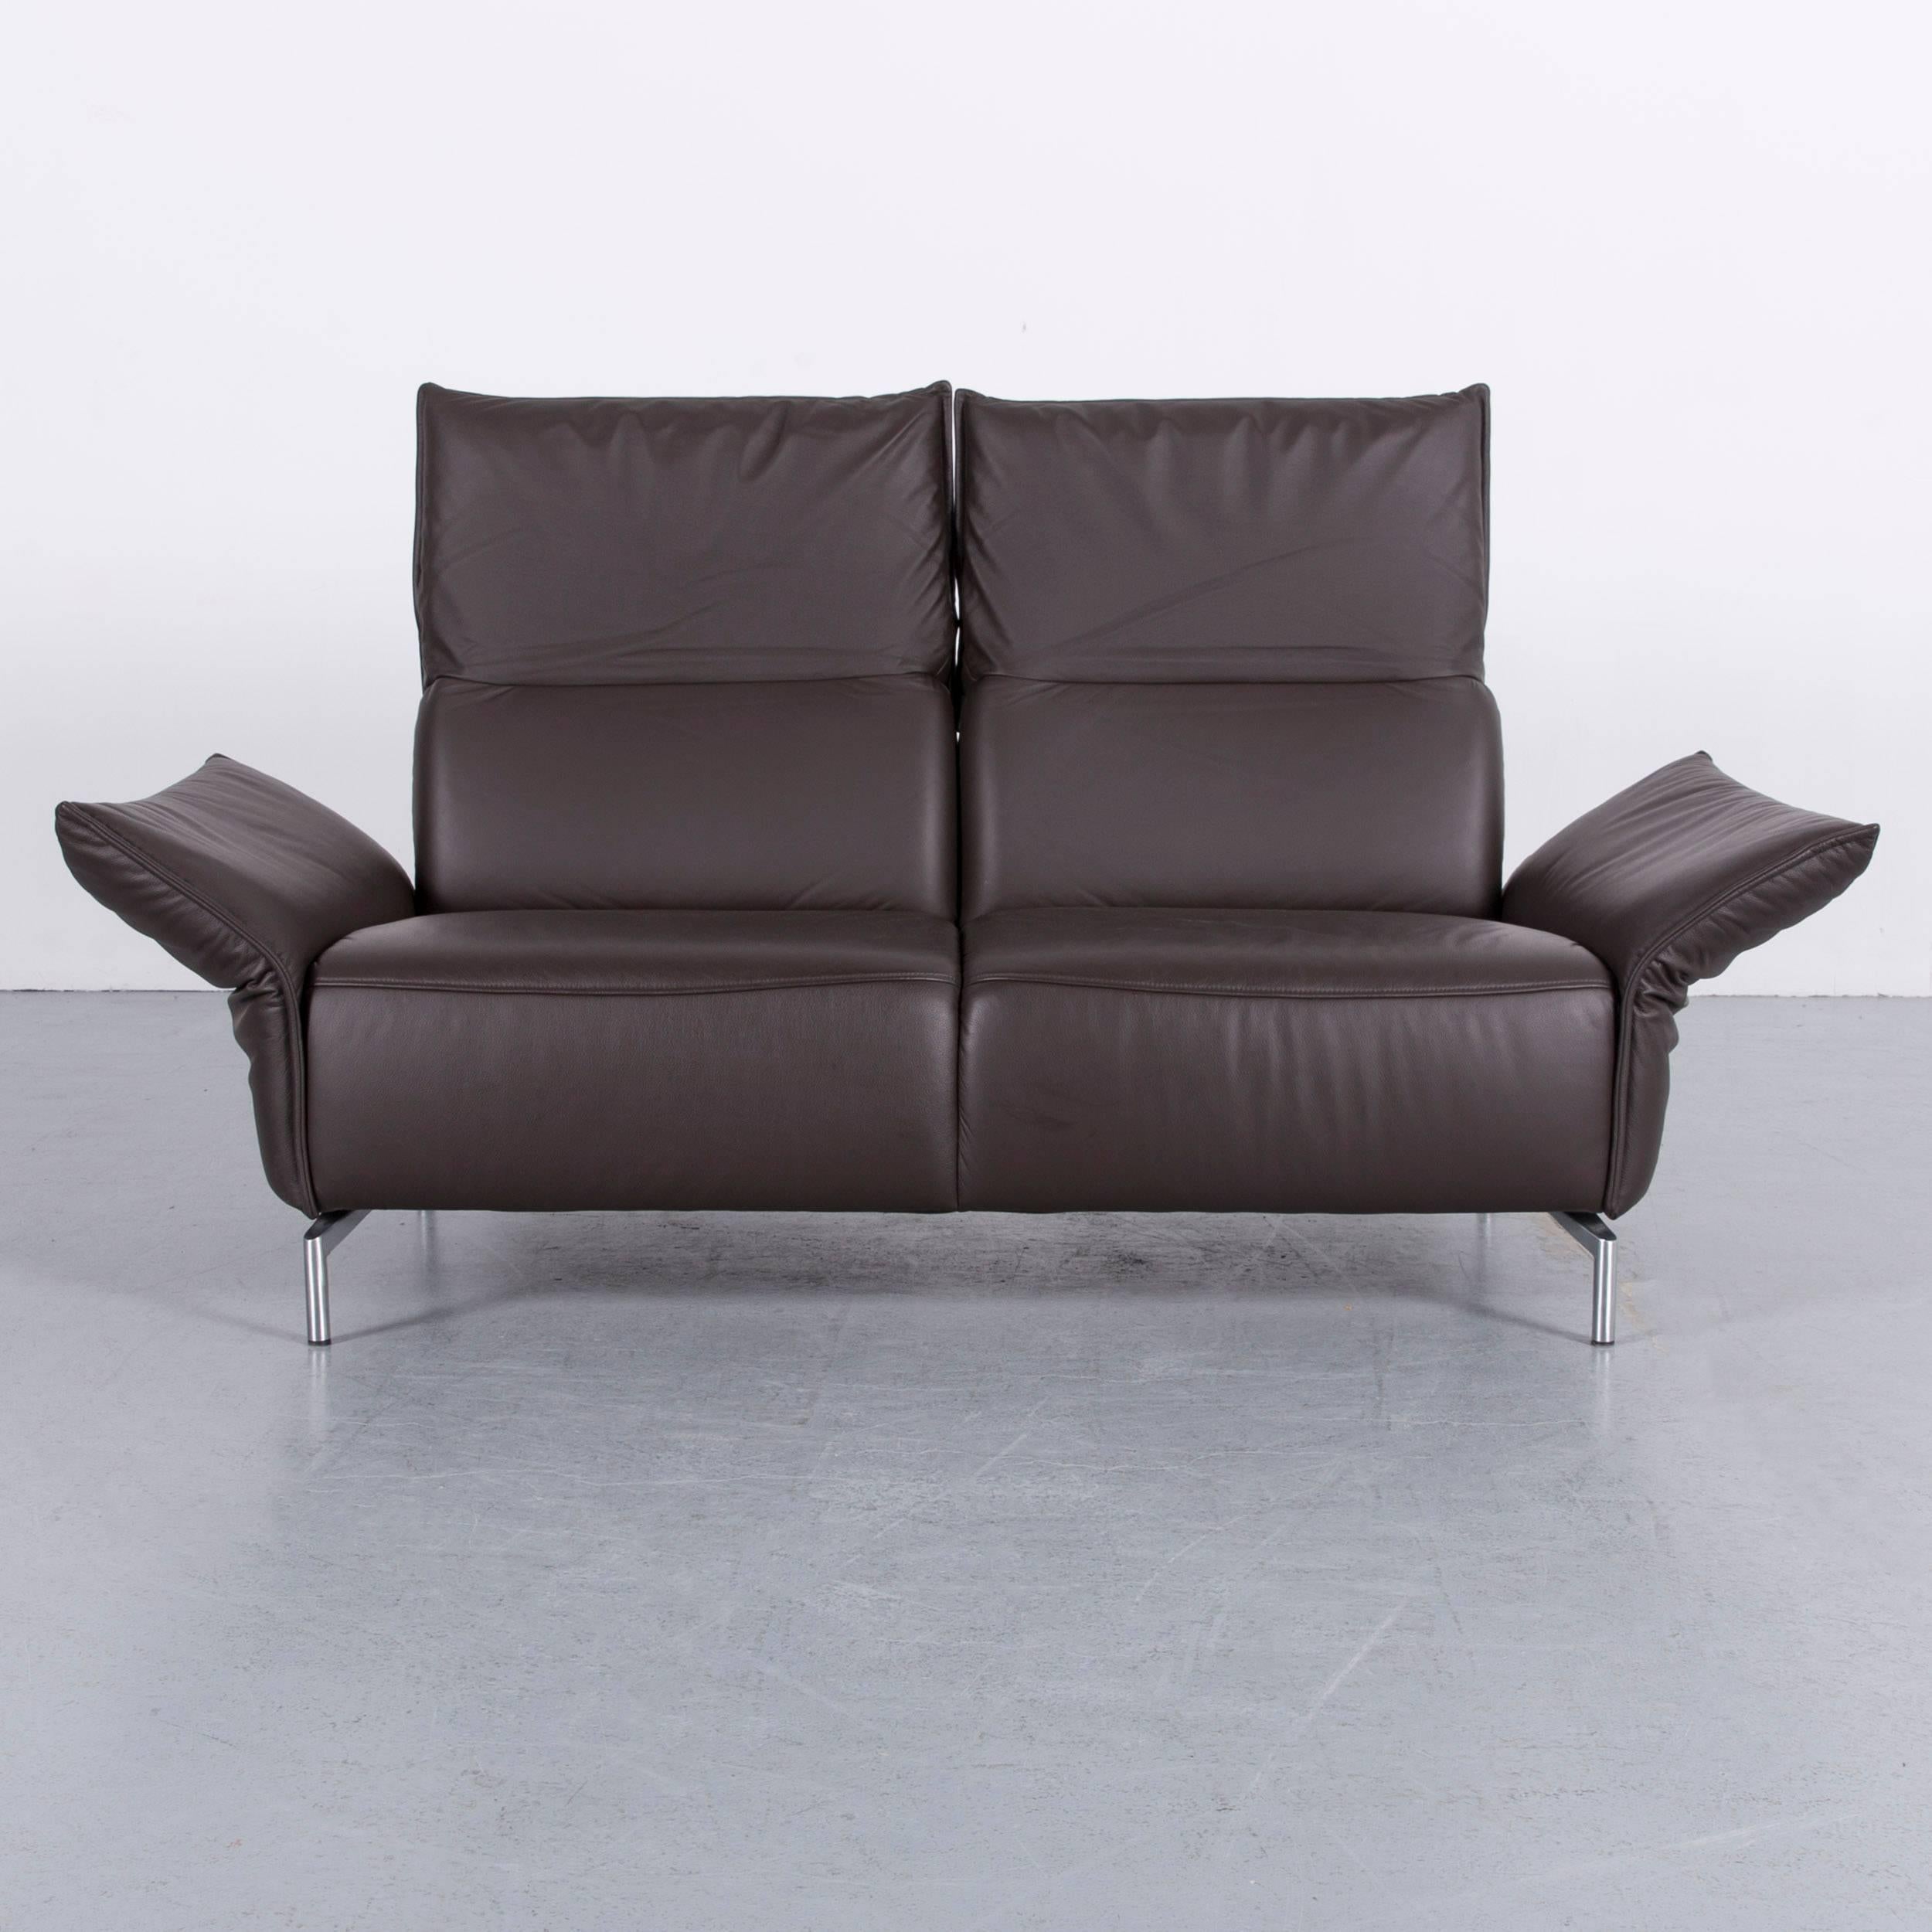 Contemporary Koinor Vanda Two-Seat Sofa Brown Leather Function